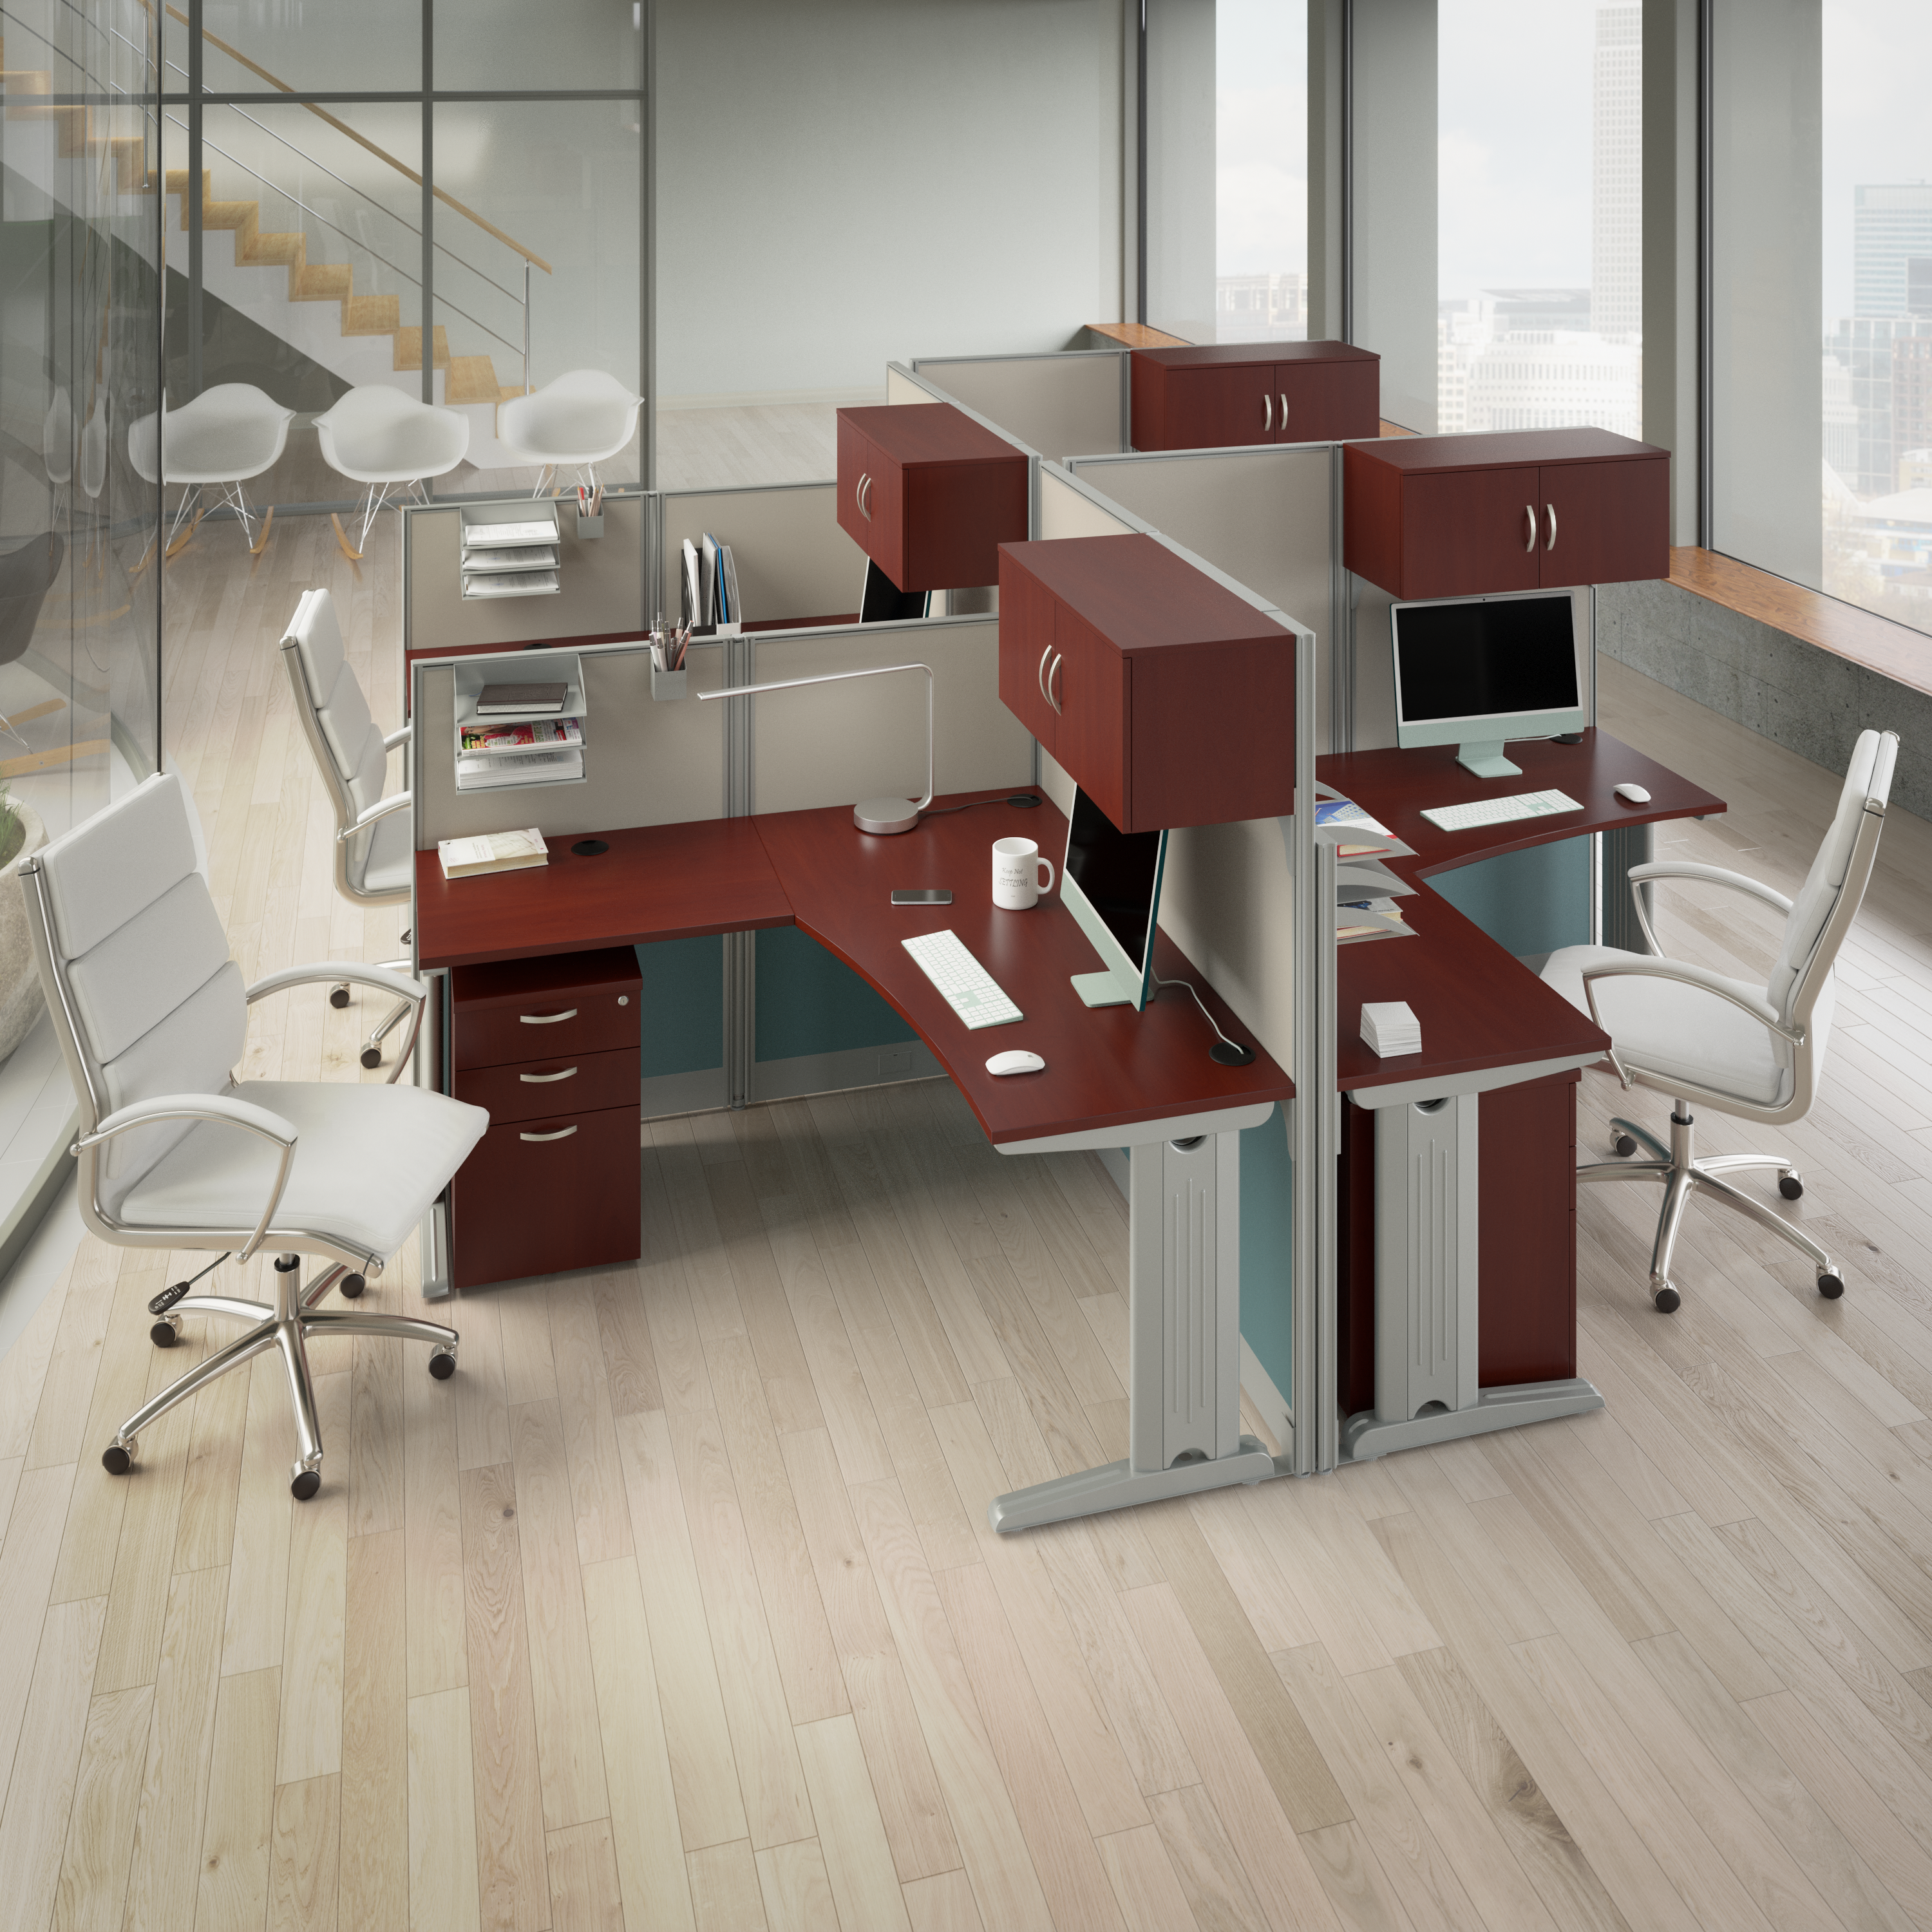 Shop Bush Business Furniture Office in an Hour 65W L Shaped Cubicle Desk with Storage, Drawers, and Organizers 08 WC36494-03STGK #color_hansen cherry